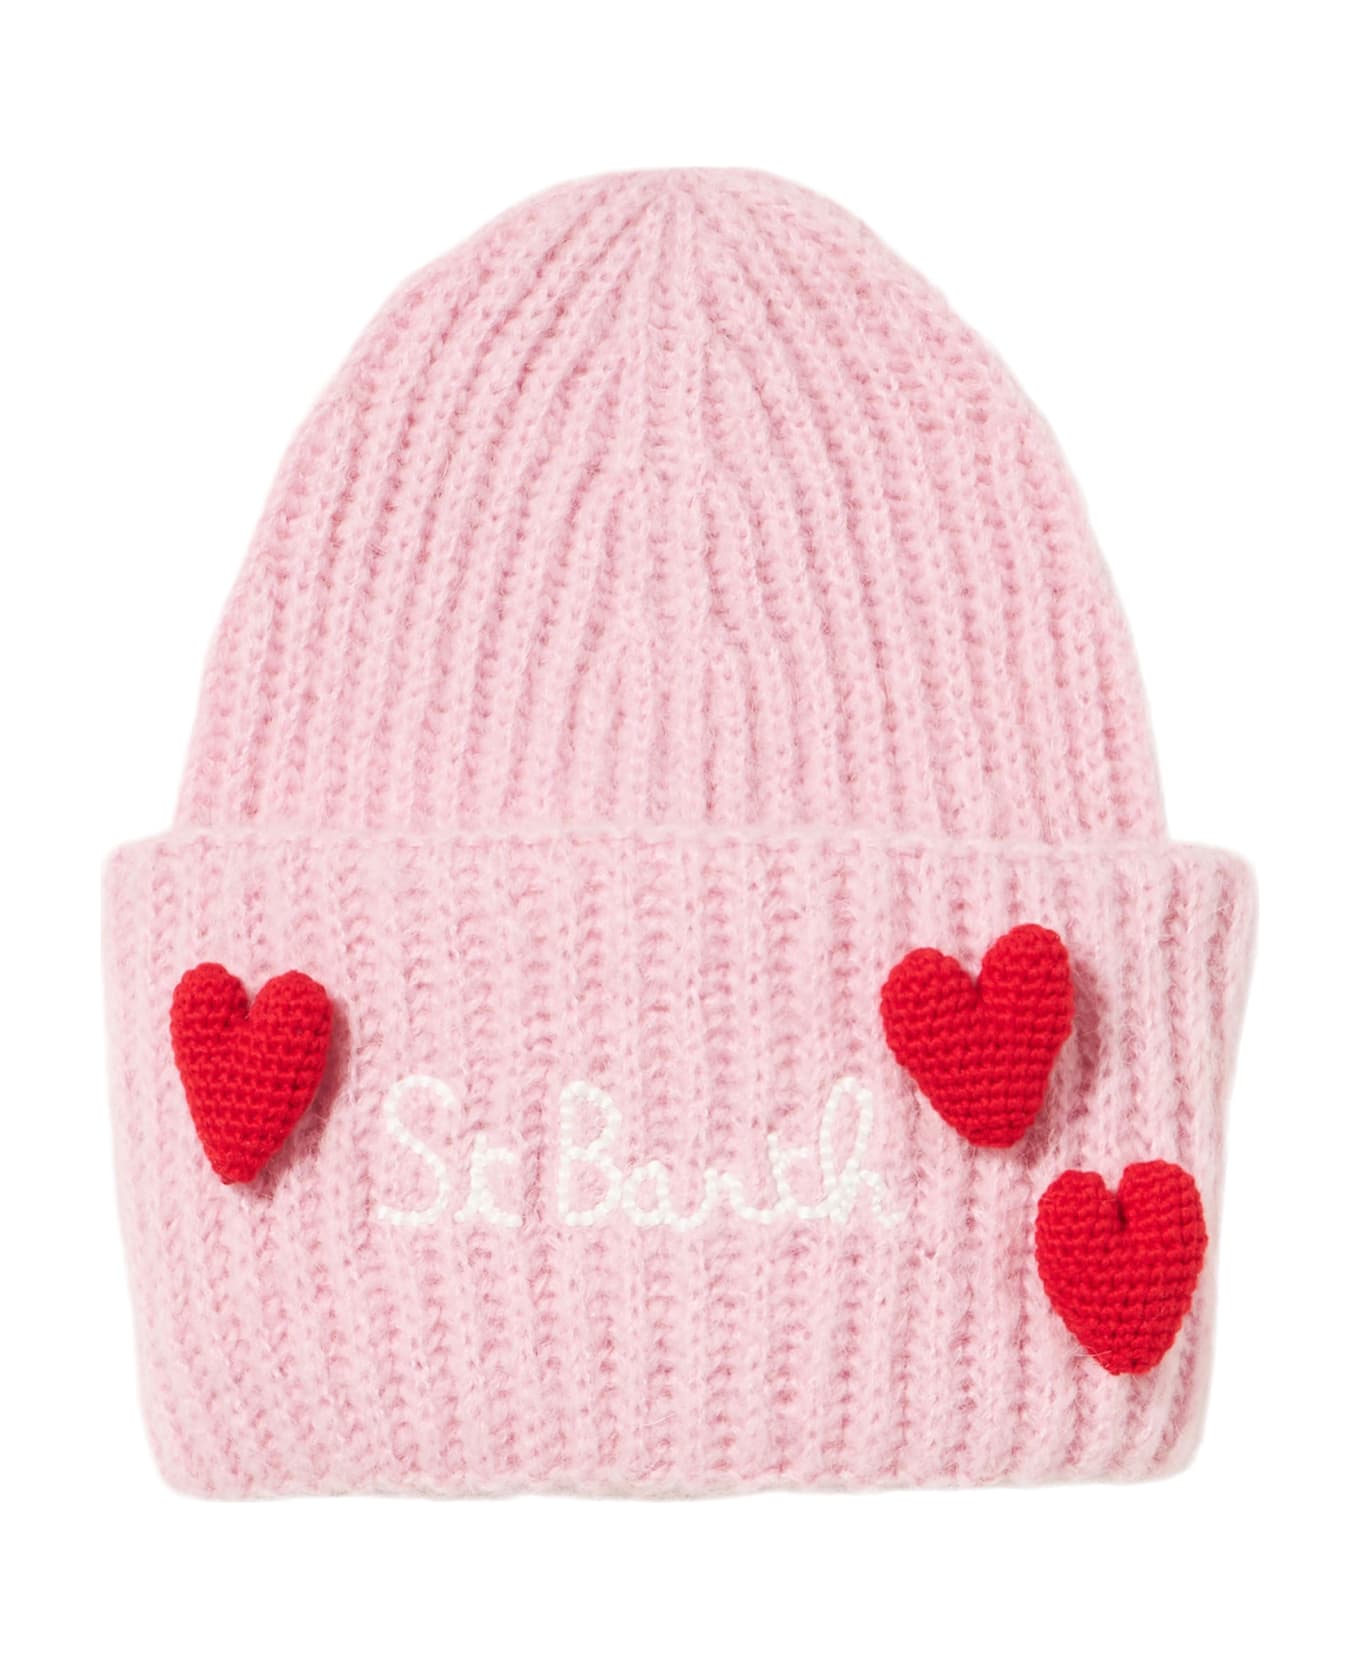 MC2 Saint Barth Girl Brushed And Ultra Soft Beanie With Hearts Appliqués - PINK